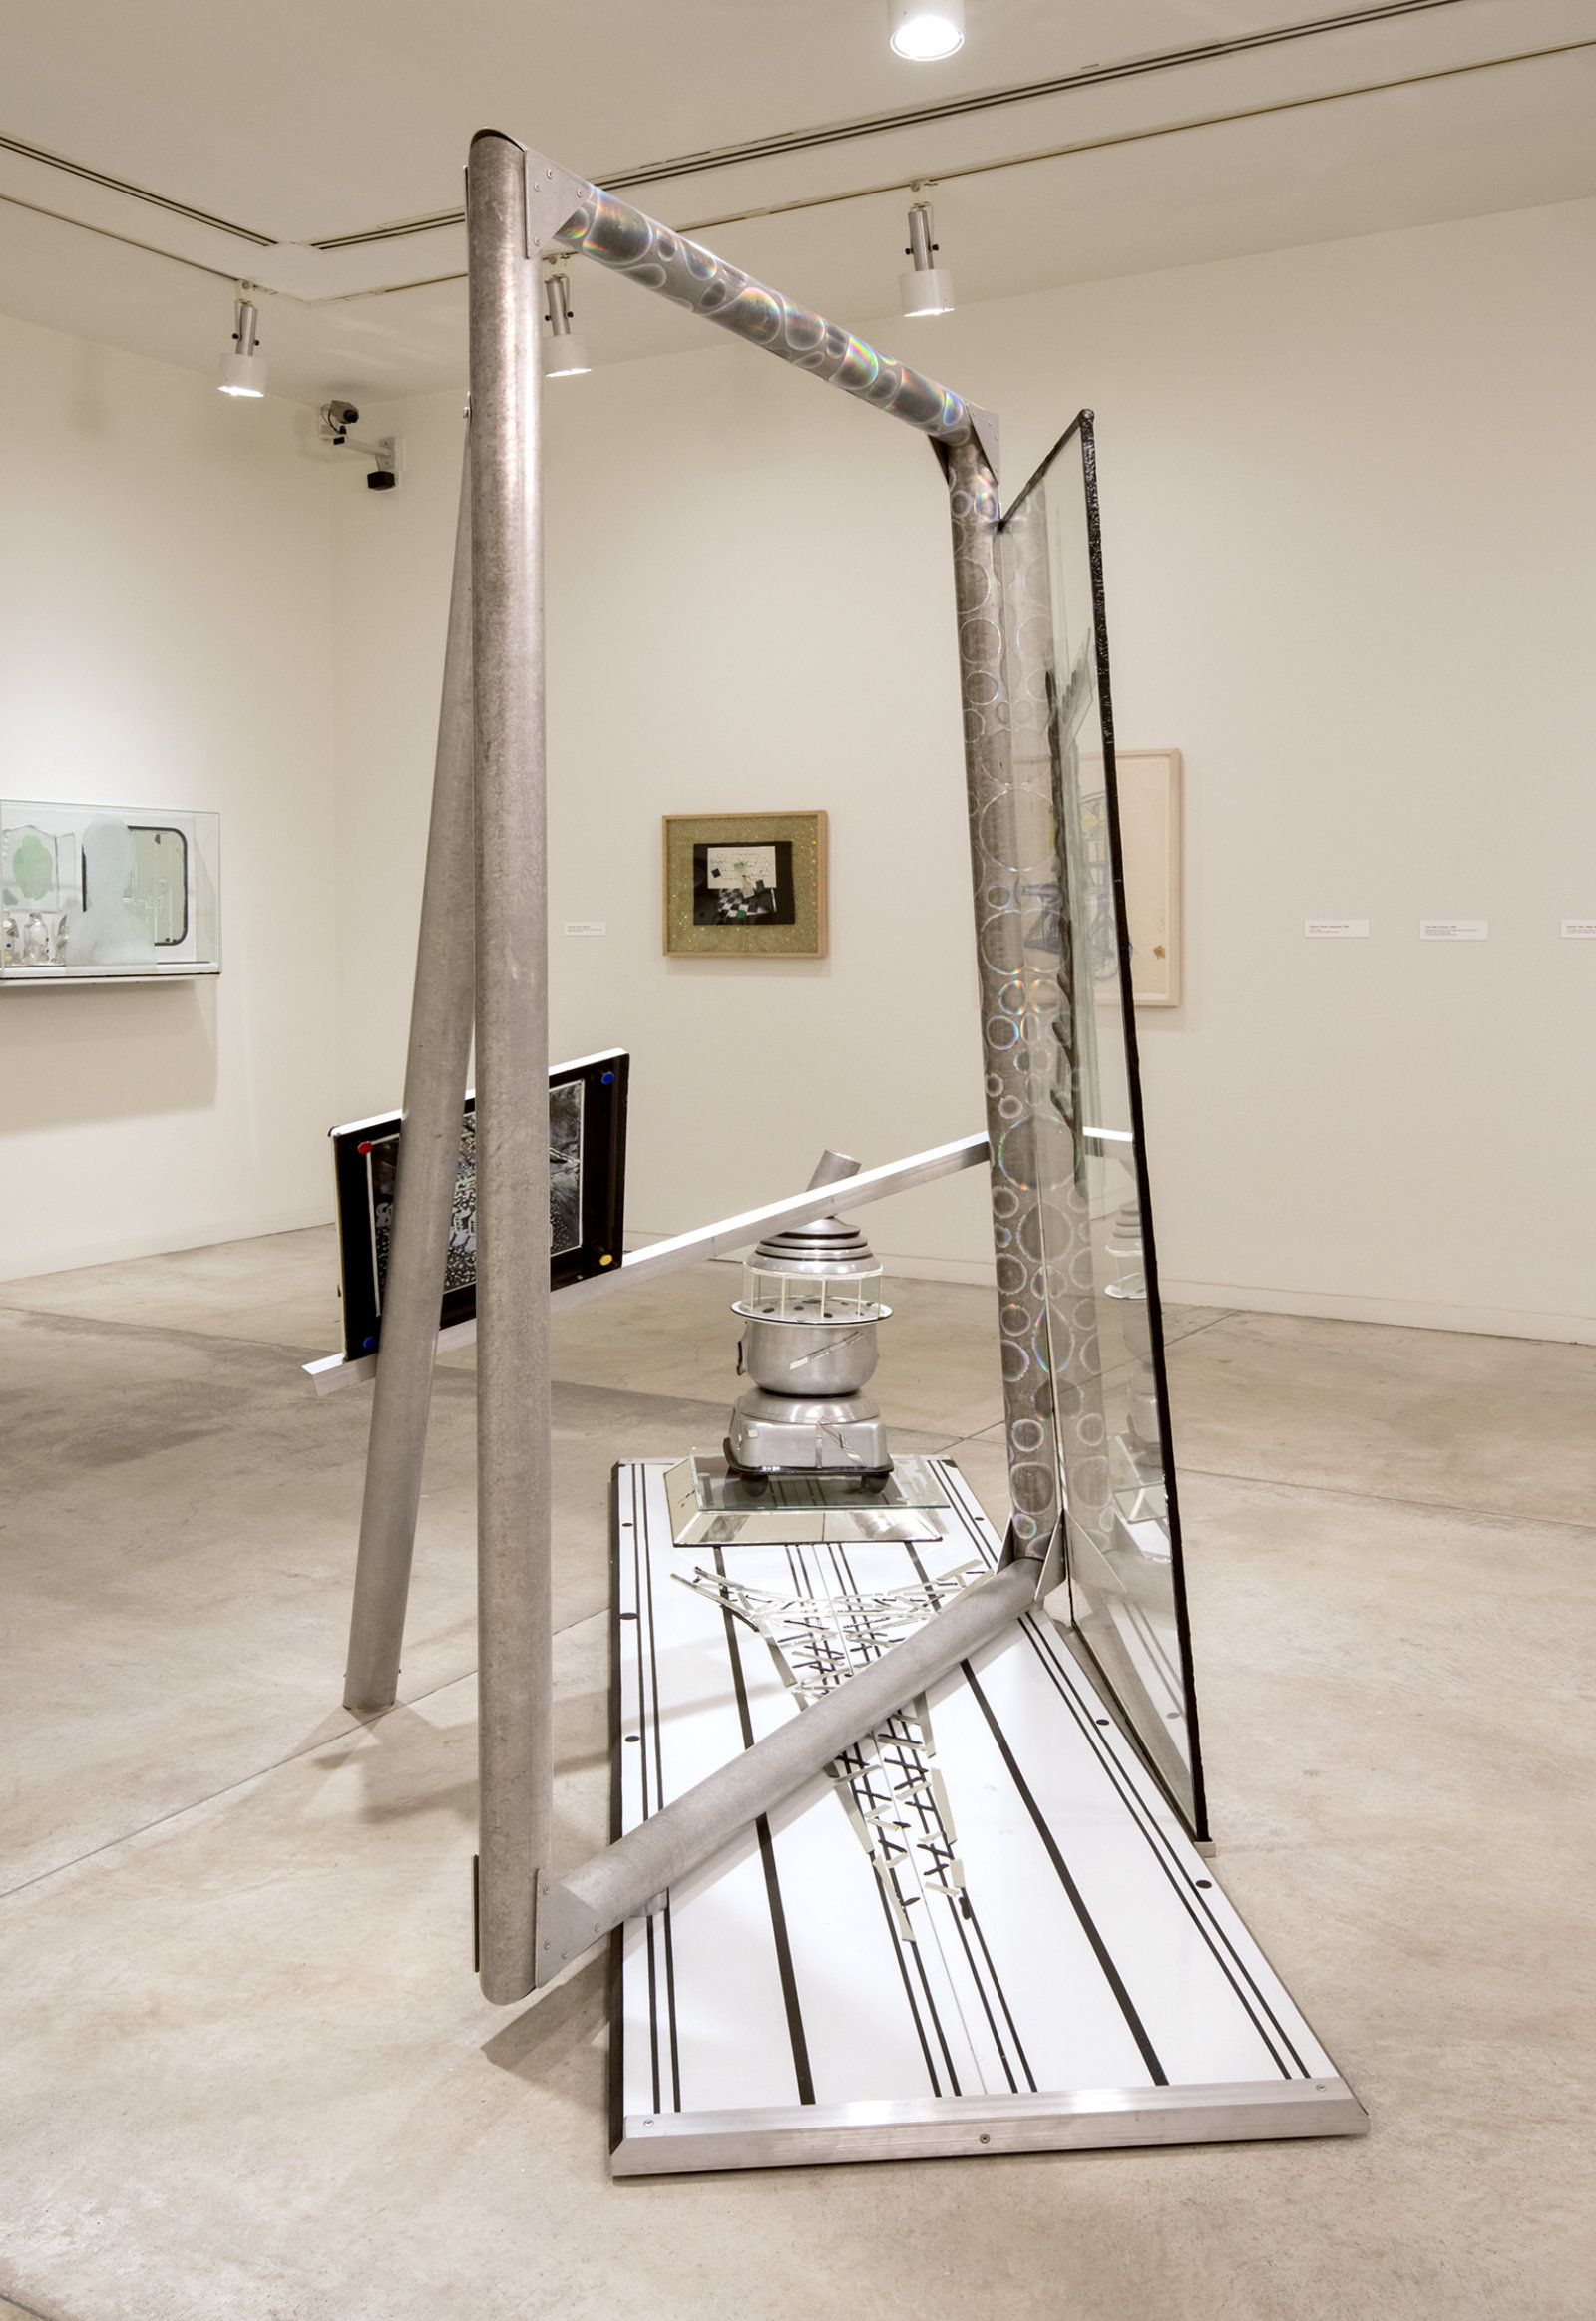 Jerry Pethick, One Side of Seurat, 1983, enamelled steel, aluminum, mirror, glass, silicone seal, etched spectrafoil, enamelled copper, 95 x 118 x 33 in. (240 x 300 x 84 cm)